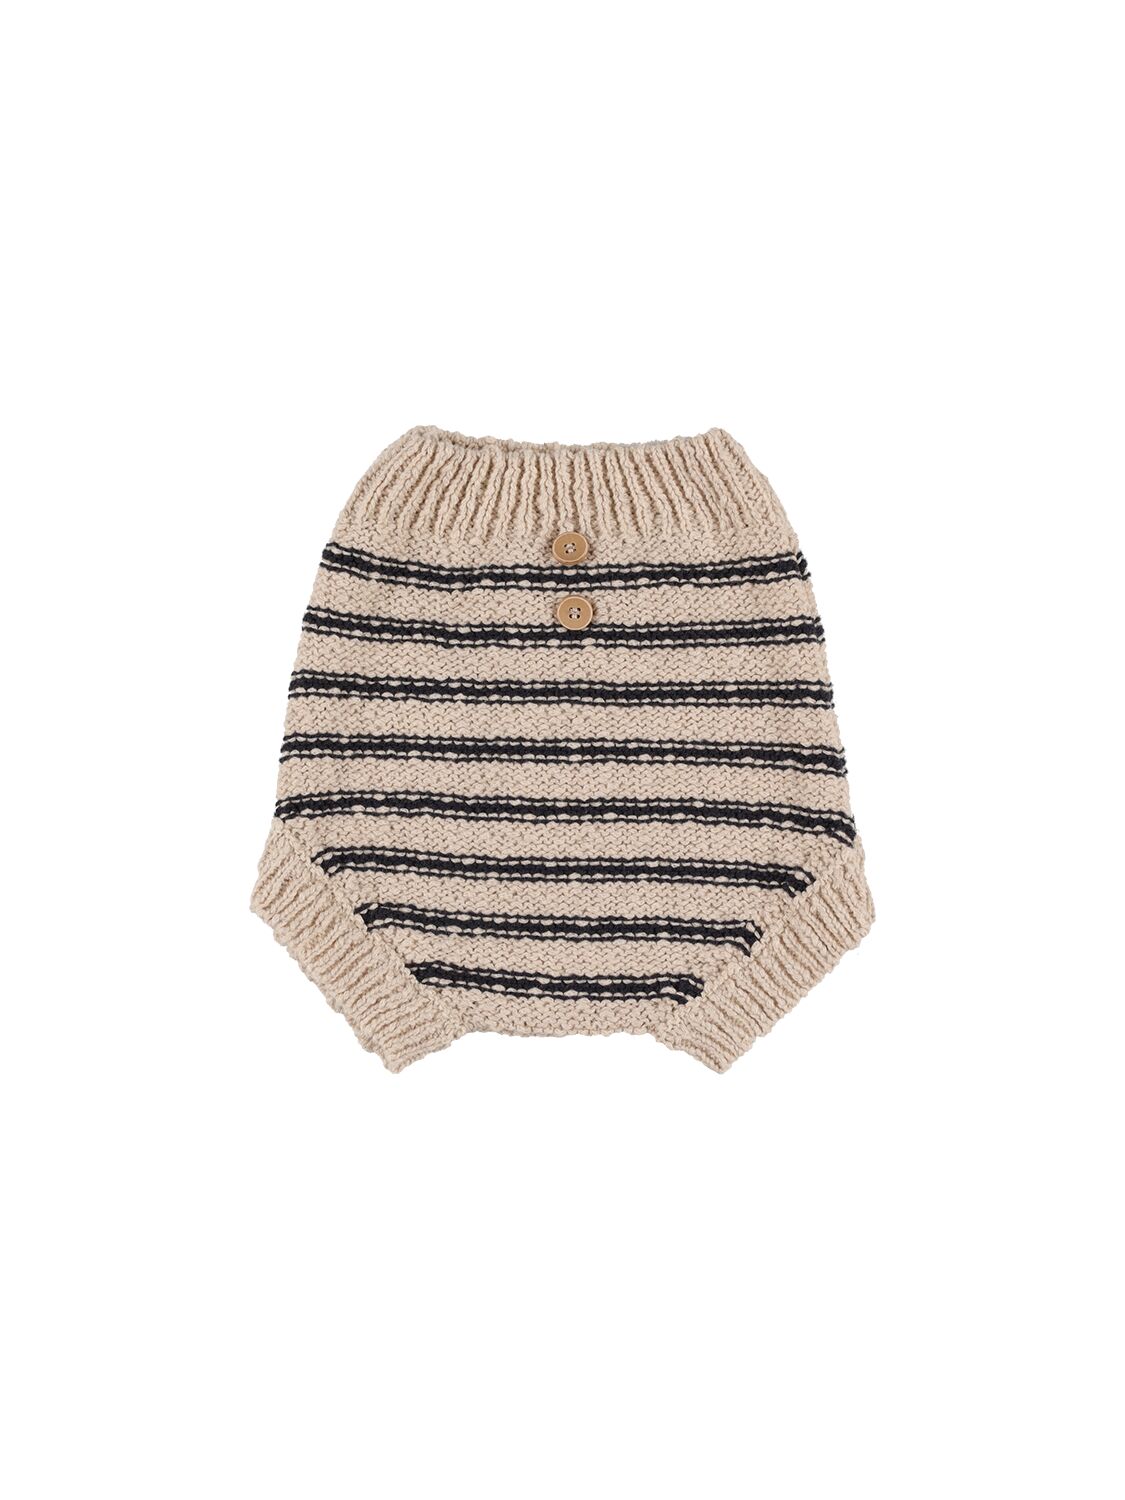 Image of Cotton & Linen Knit Bloomers